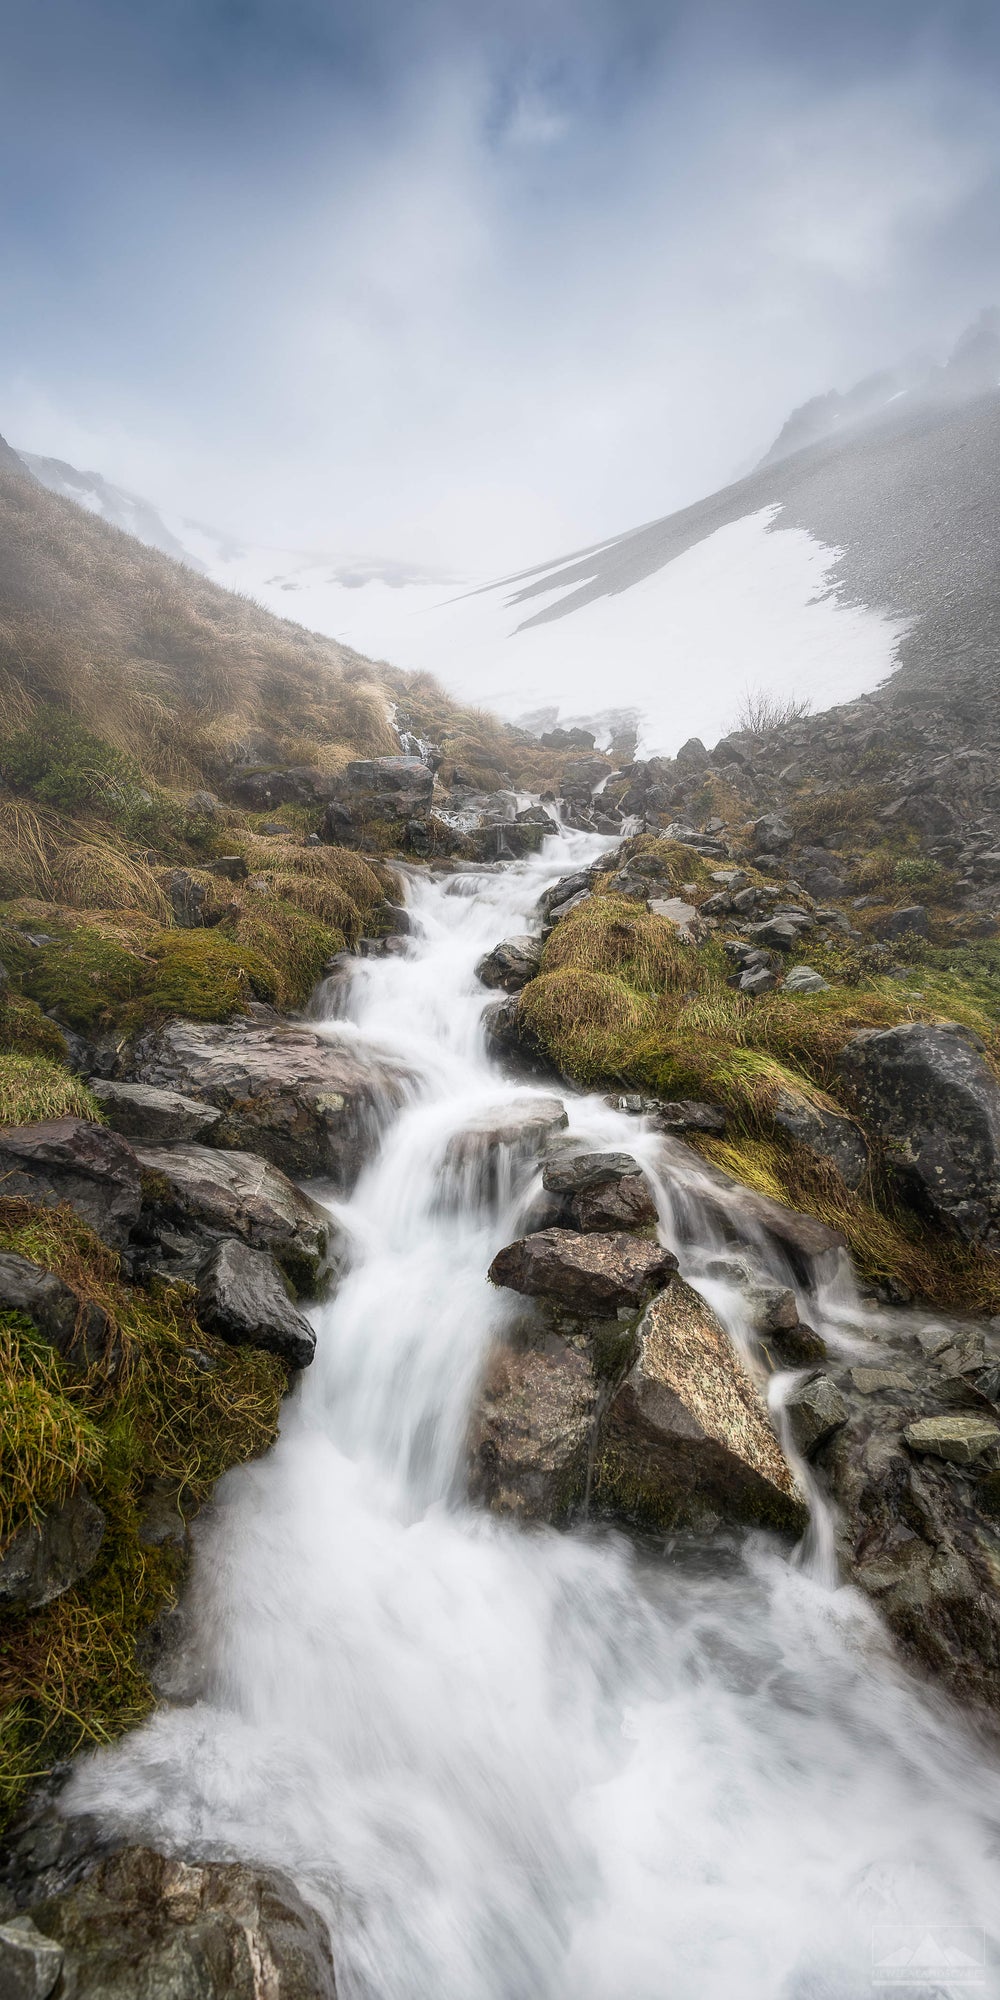 vertical photograph of a snowy mountain with a waterfall running down rocks in the centre of the image